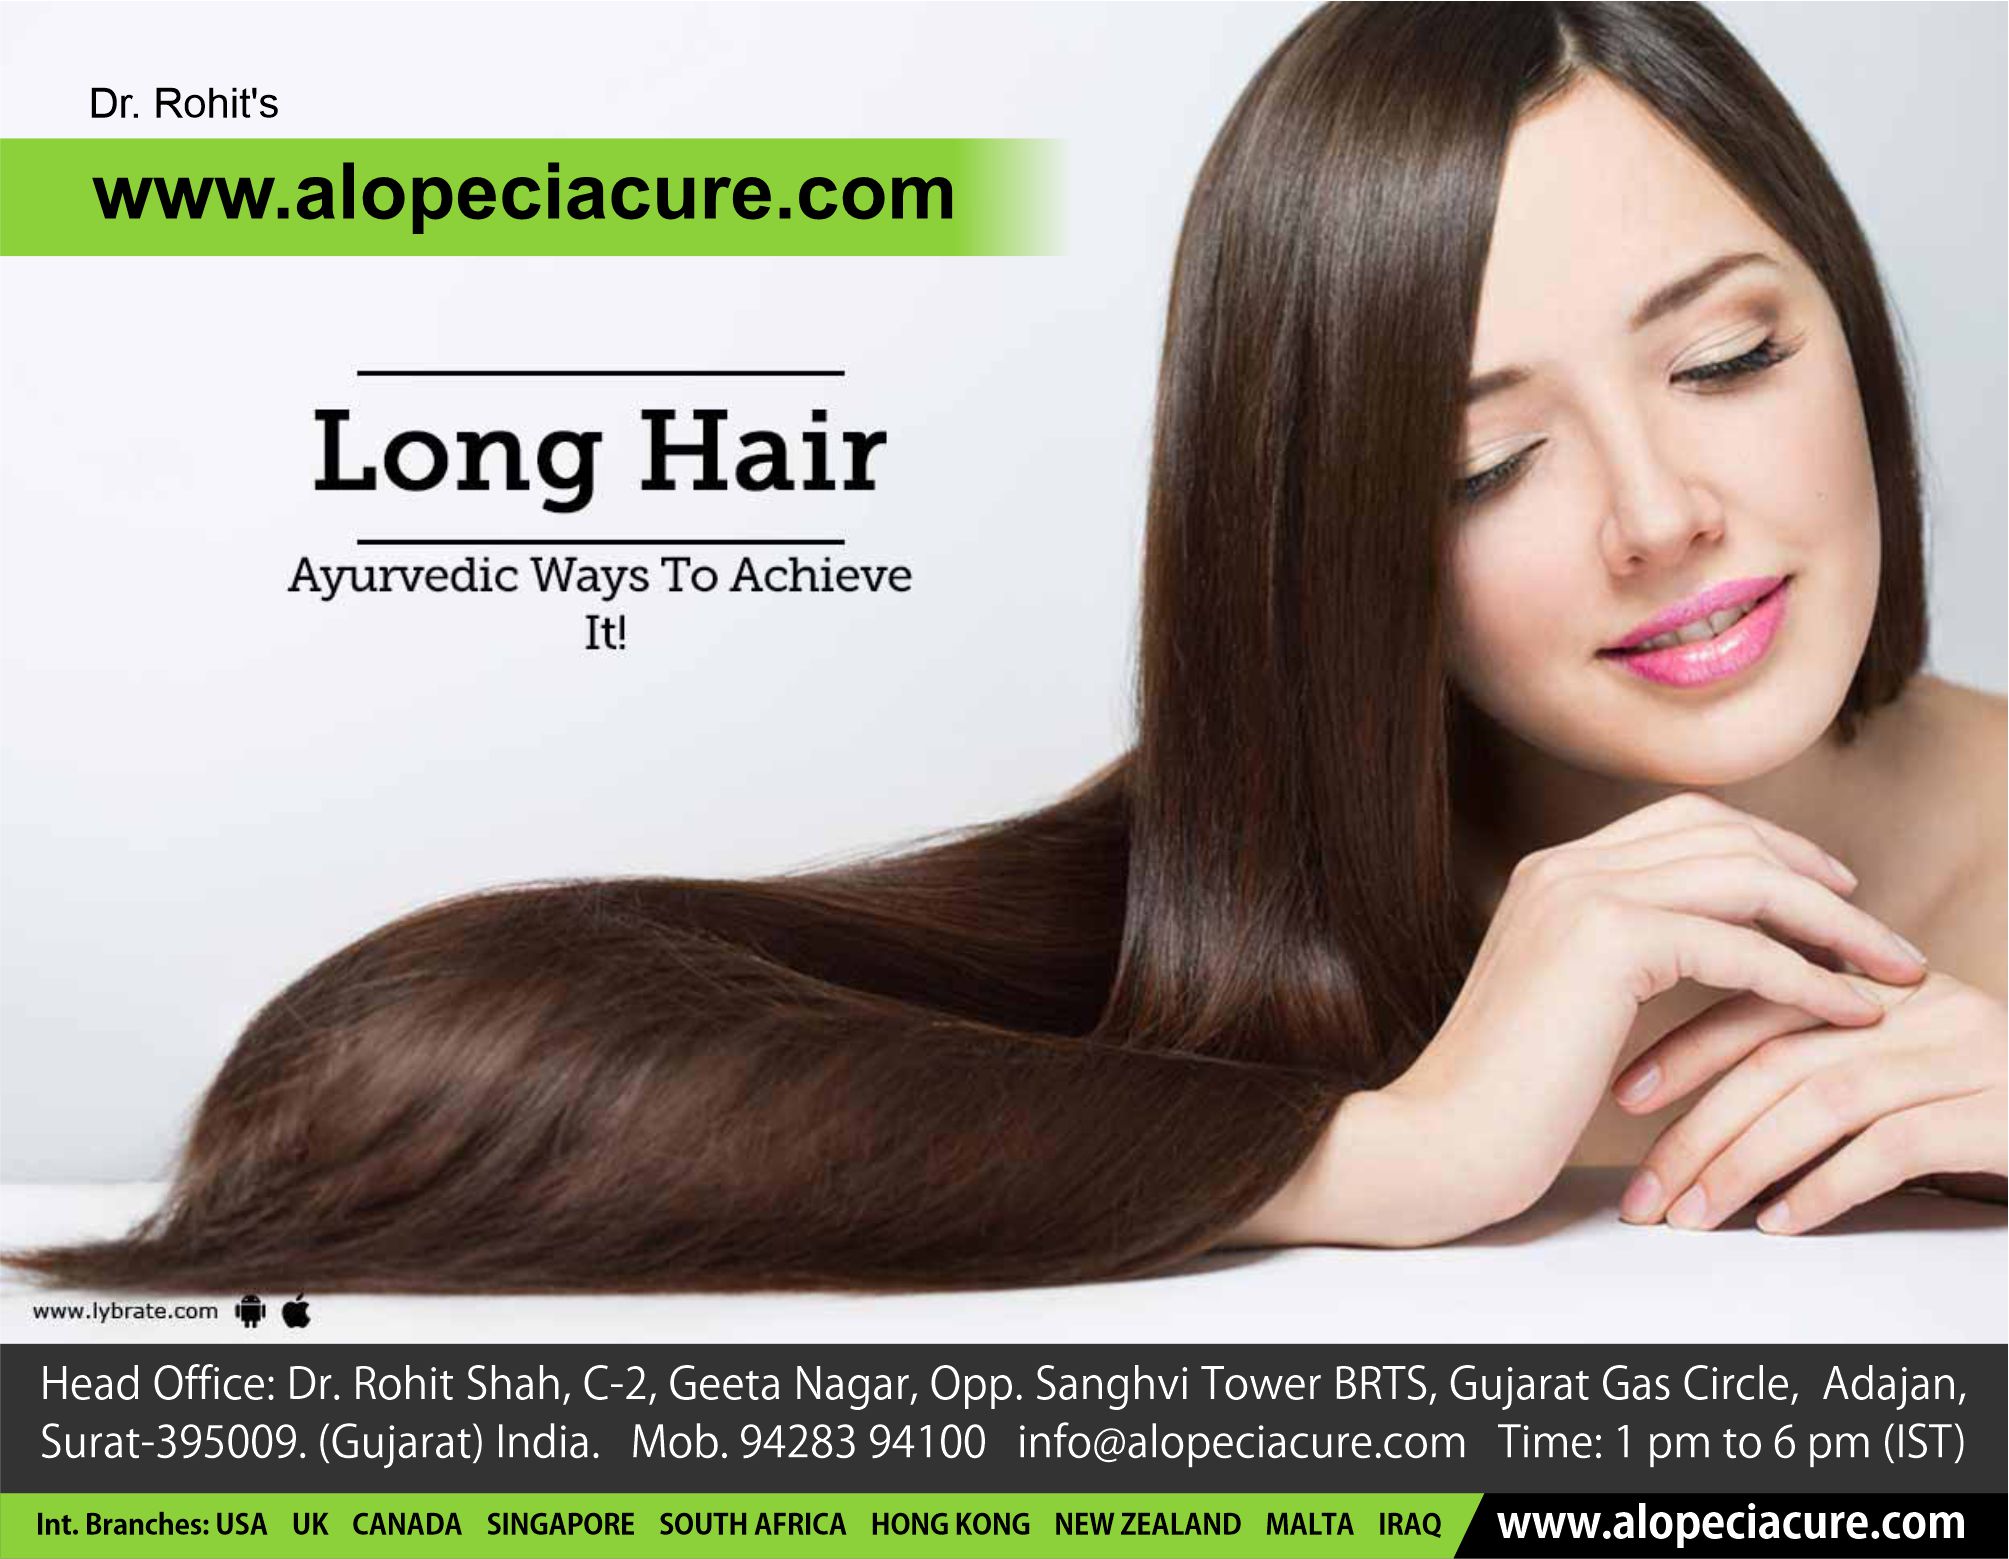 Long Hair - Natural Ways to Achieve It!